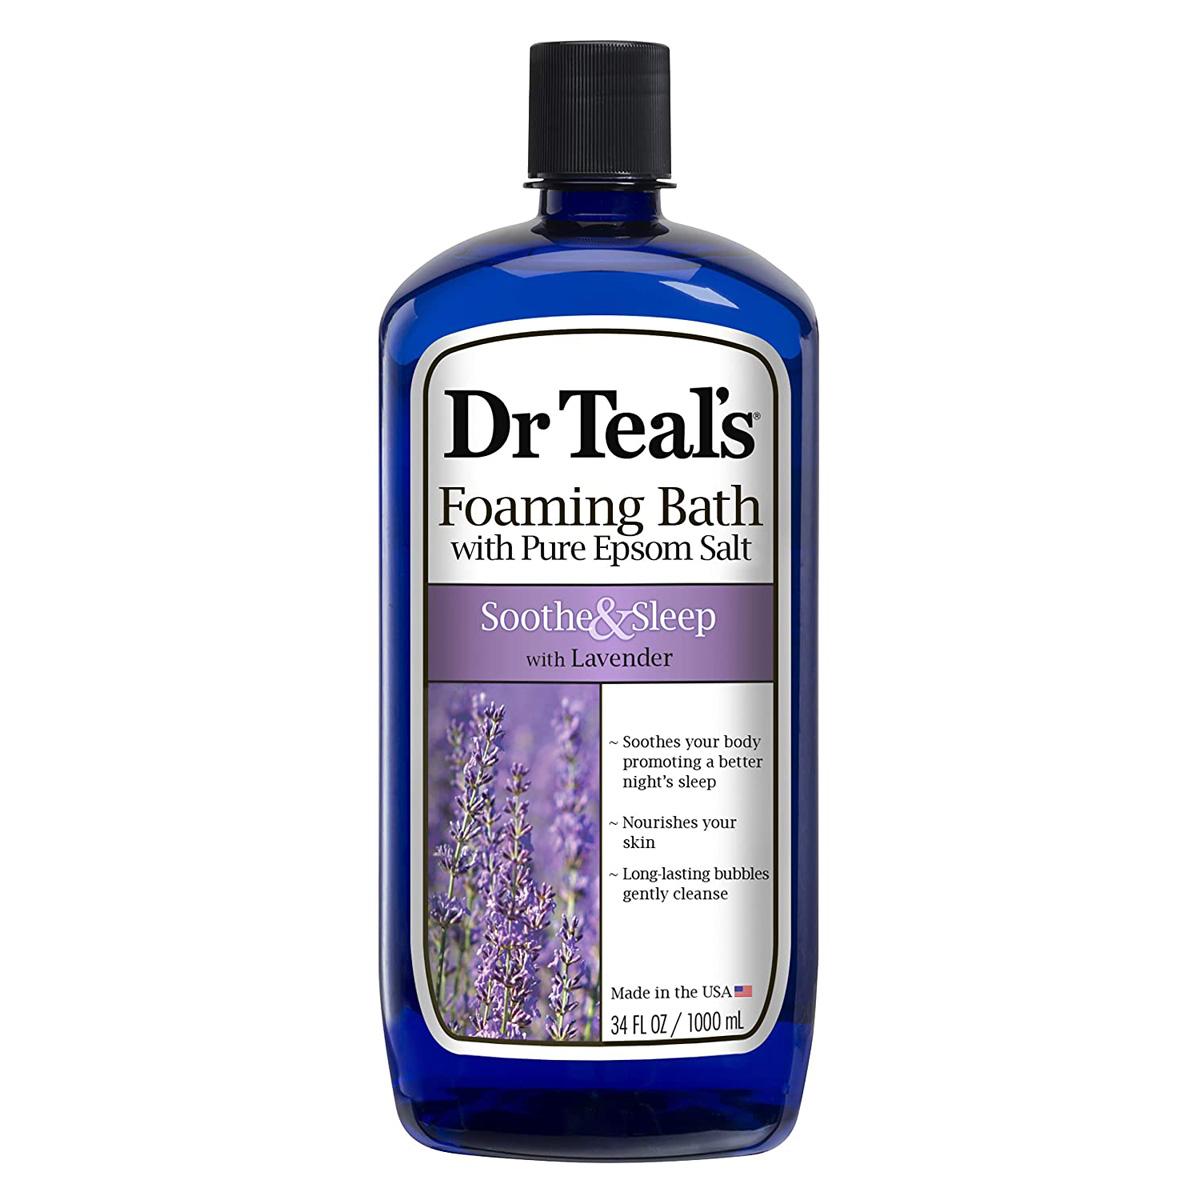 Dr Teals Foaming Bath with Pure Epsom Salt for $3.67 Shipped